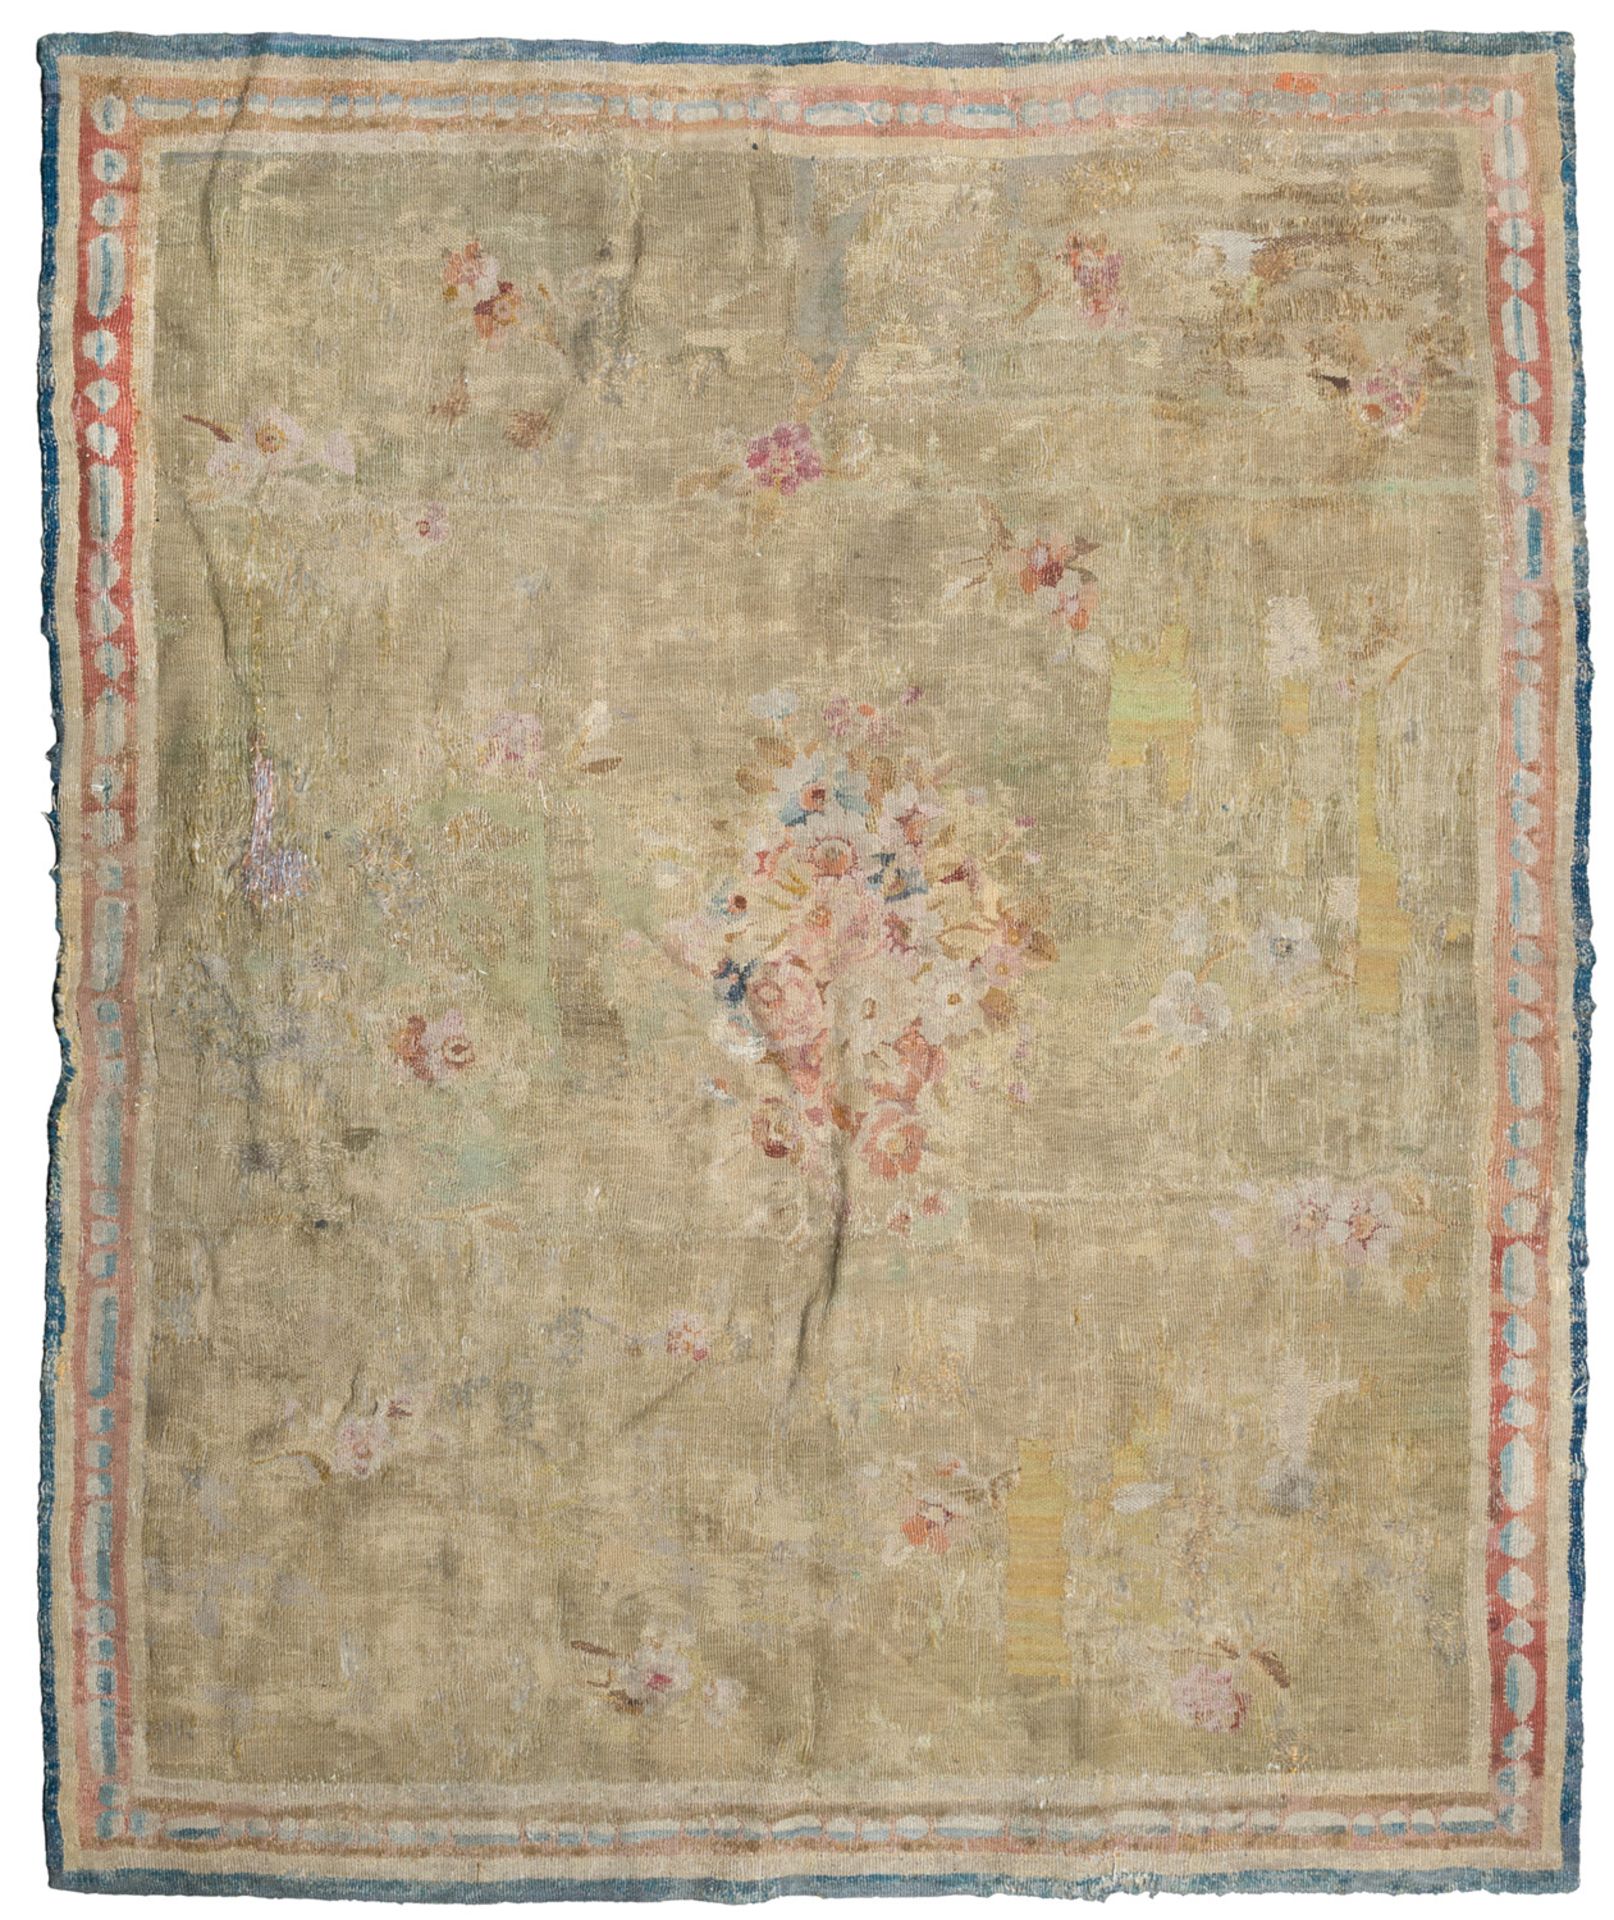 SMALL FRENCH TAPESTRY 18TH CENTURY